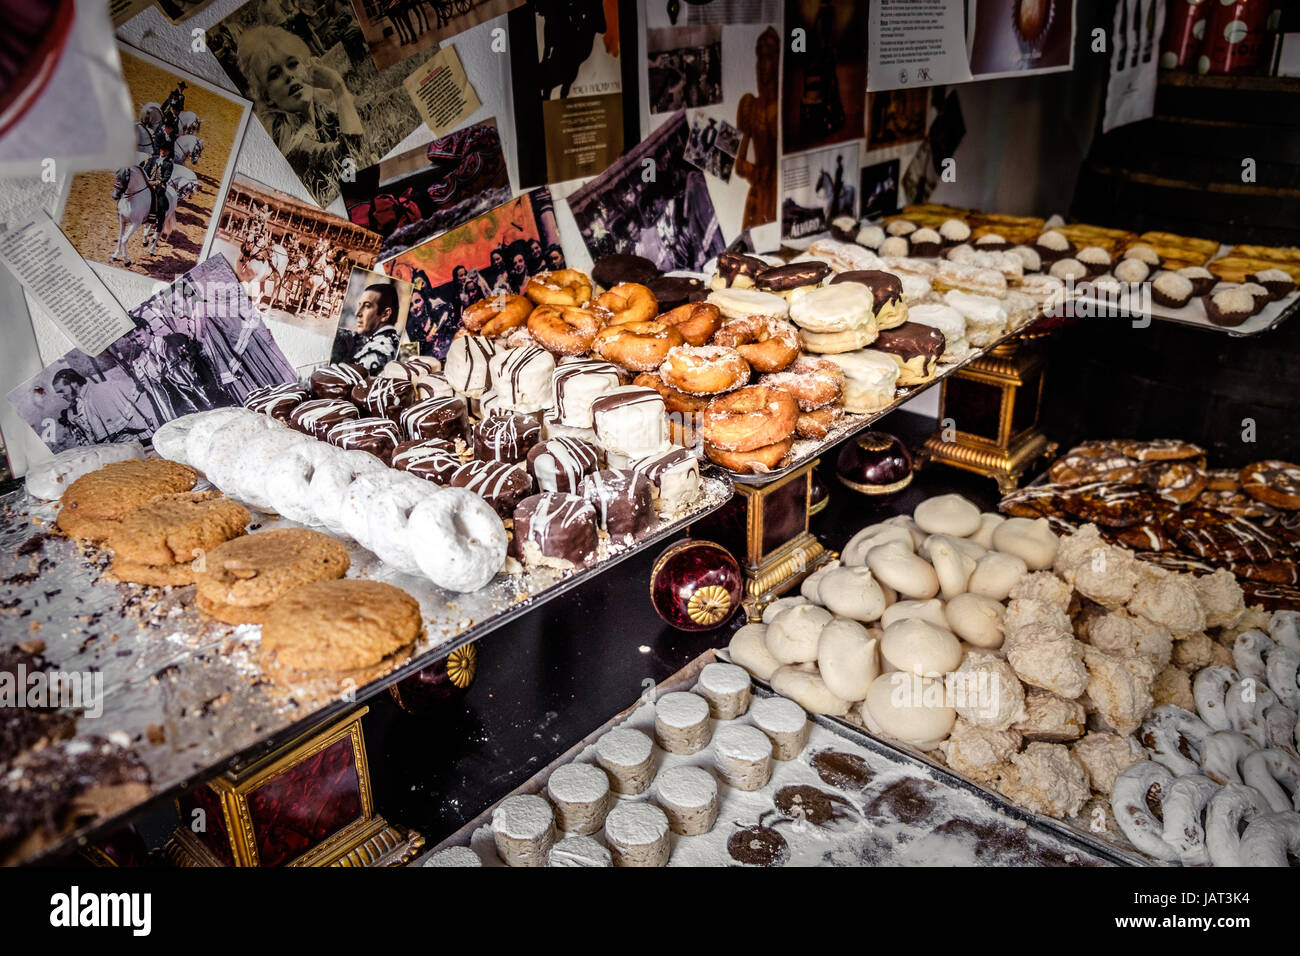 Pastries & cakes on sale in a shop in Ronda, Spain Stock Photo